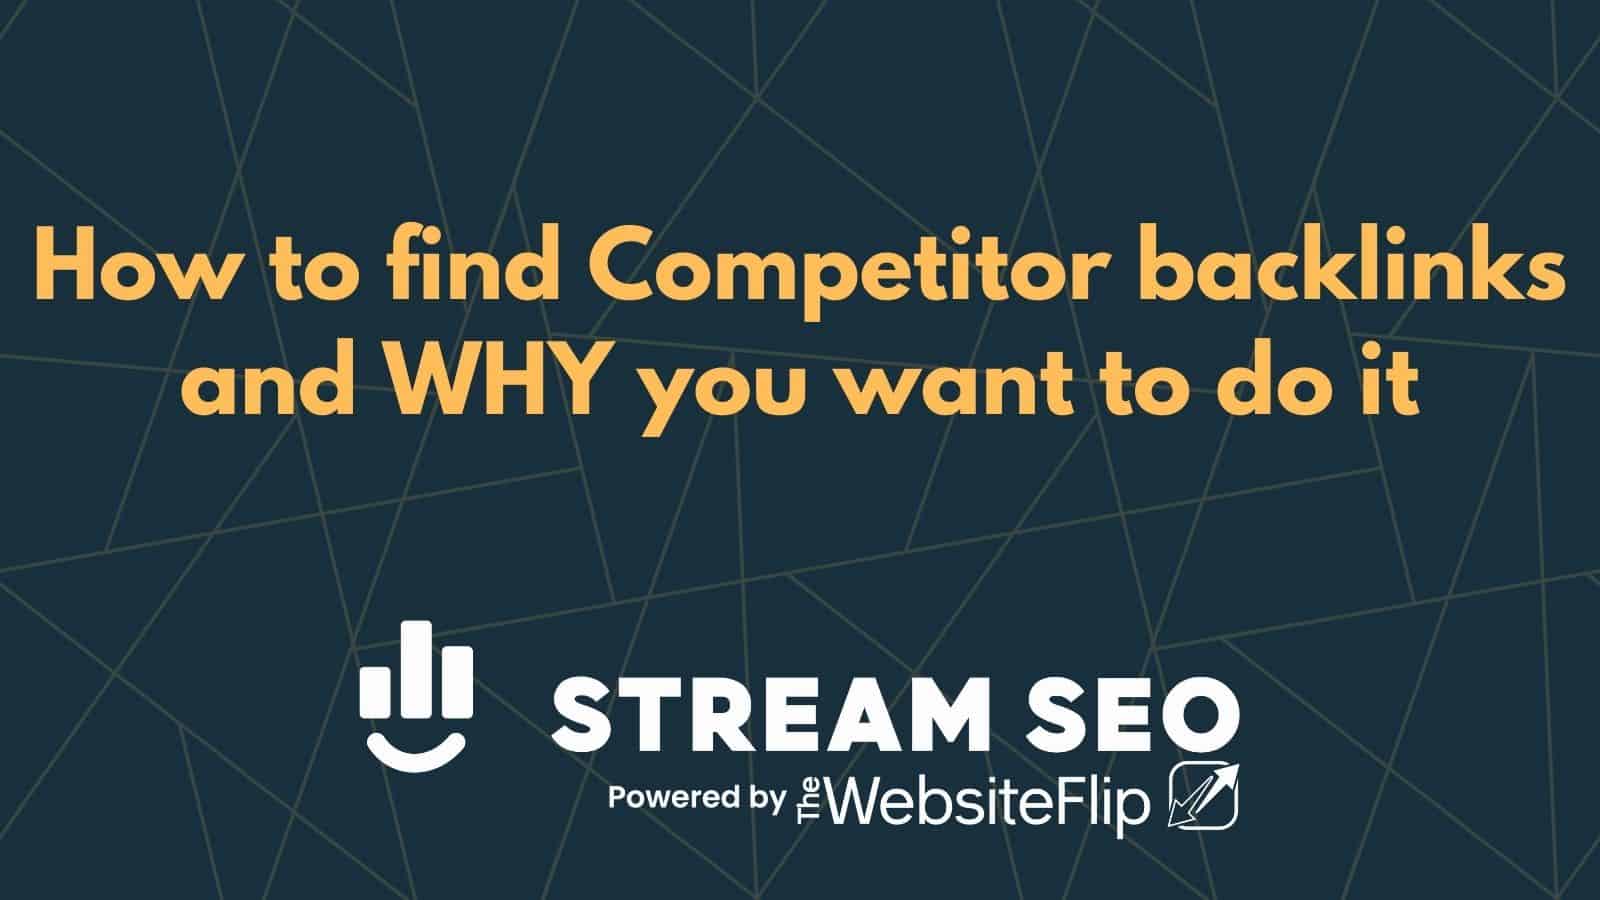 How to find Competitor backlinks and WHY you want to do it